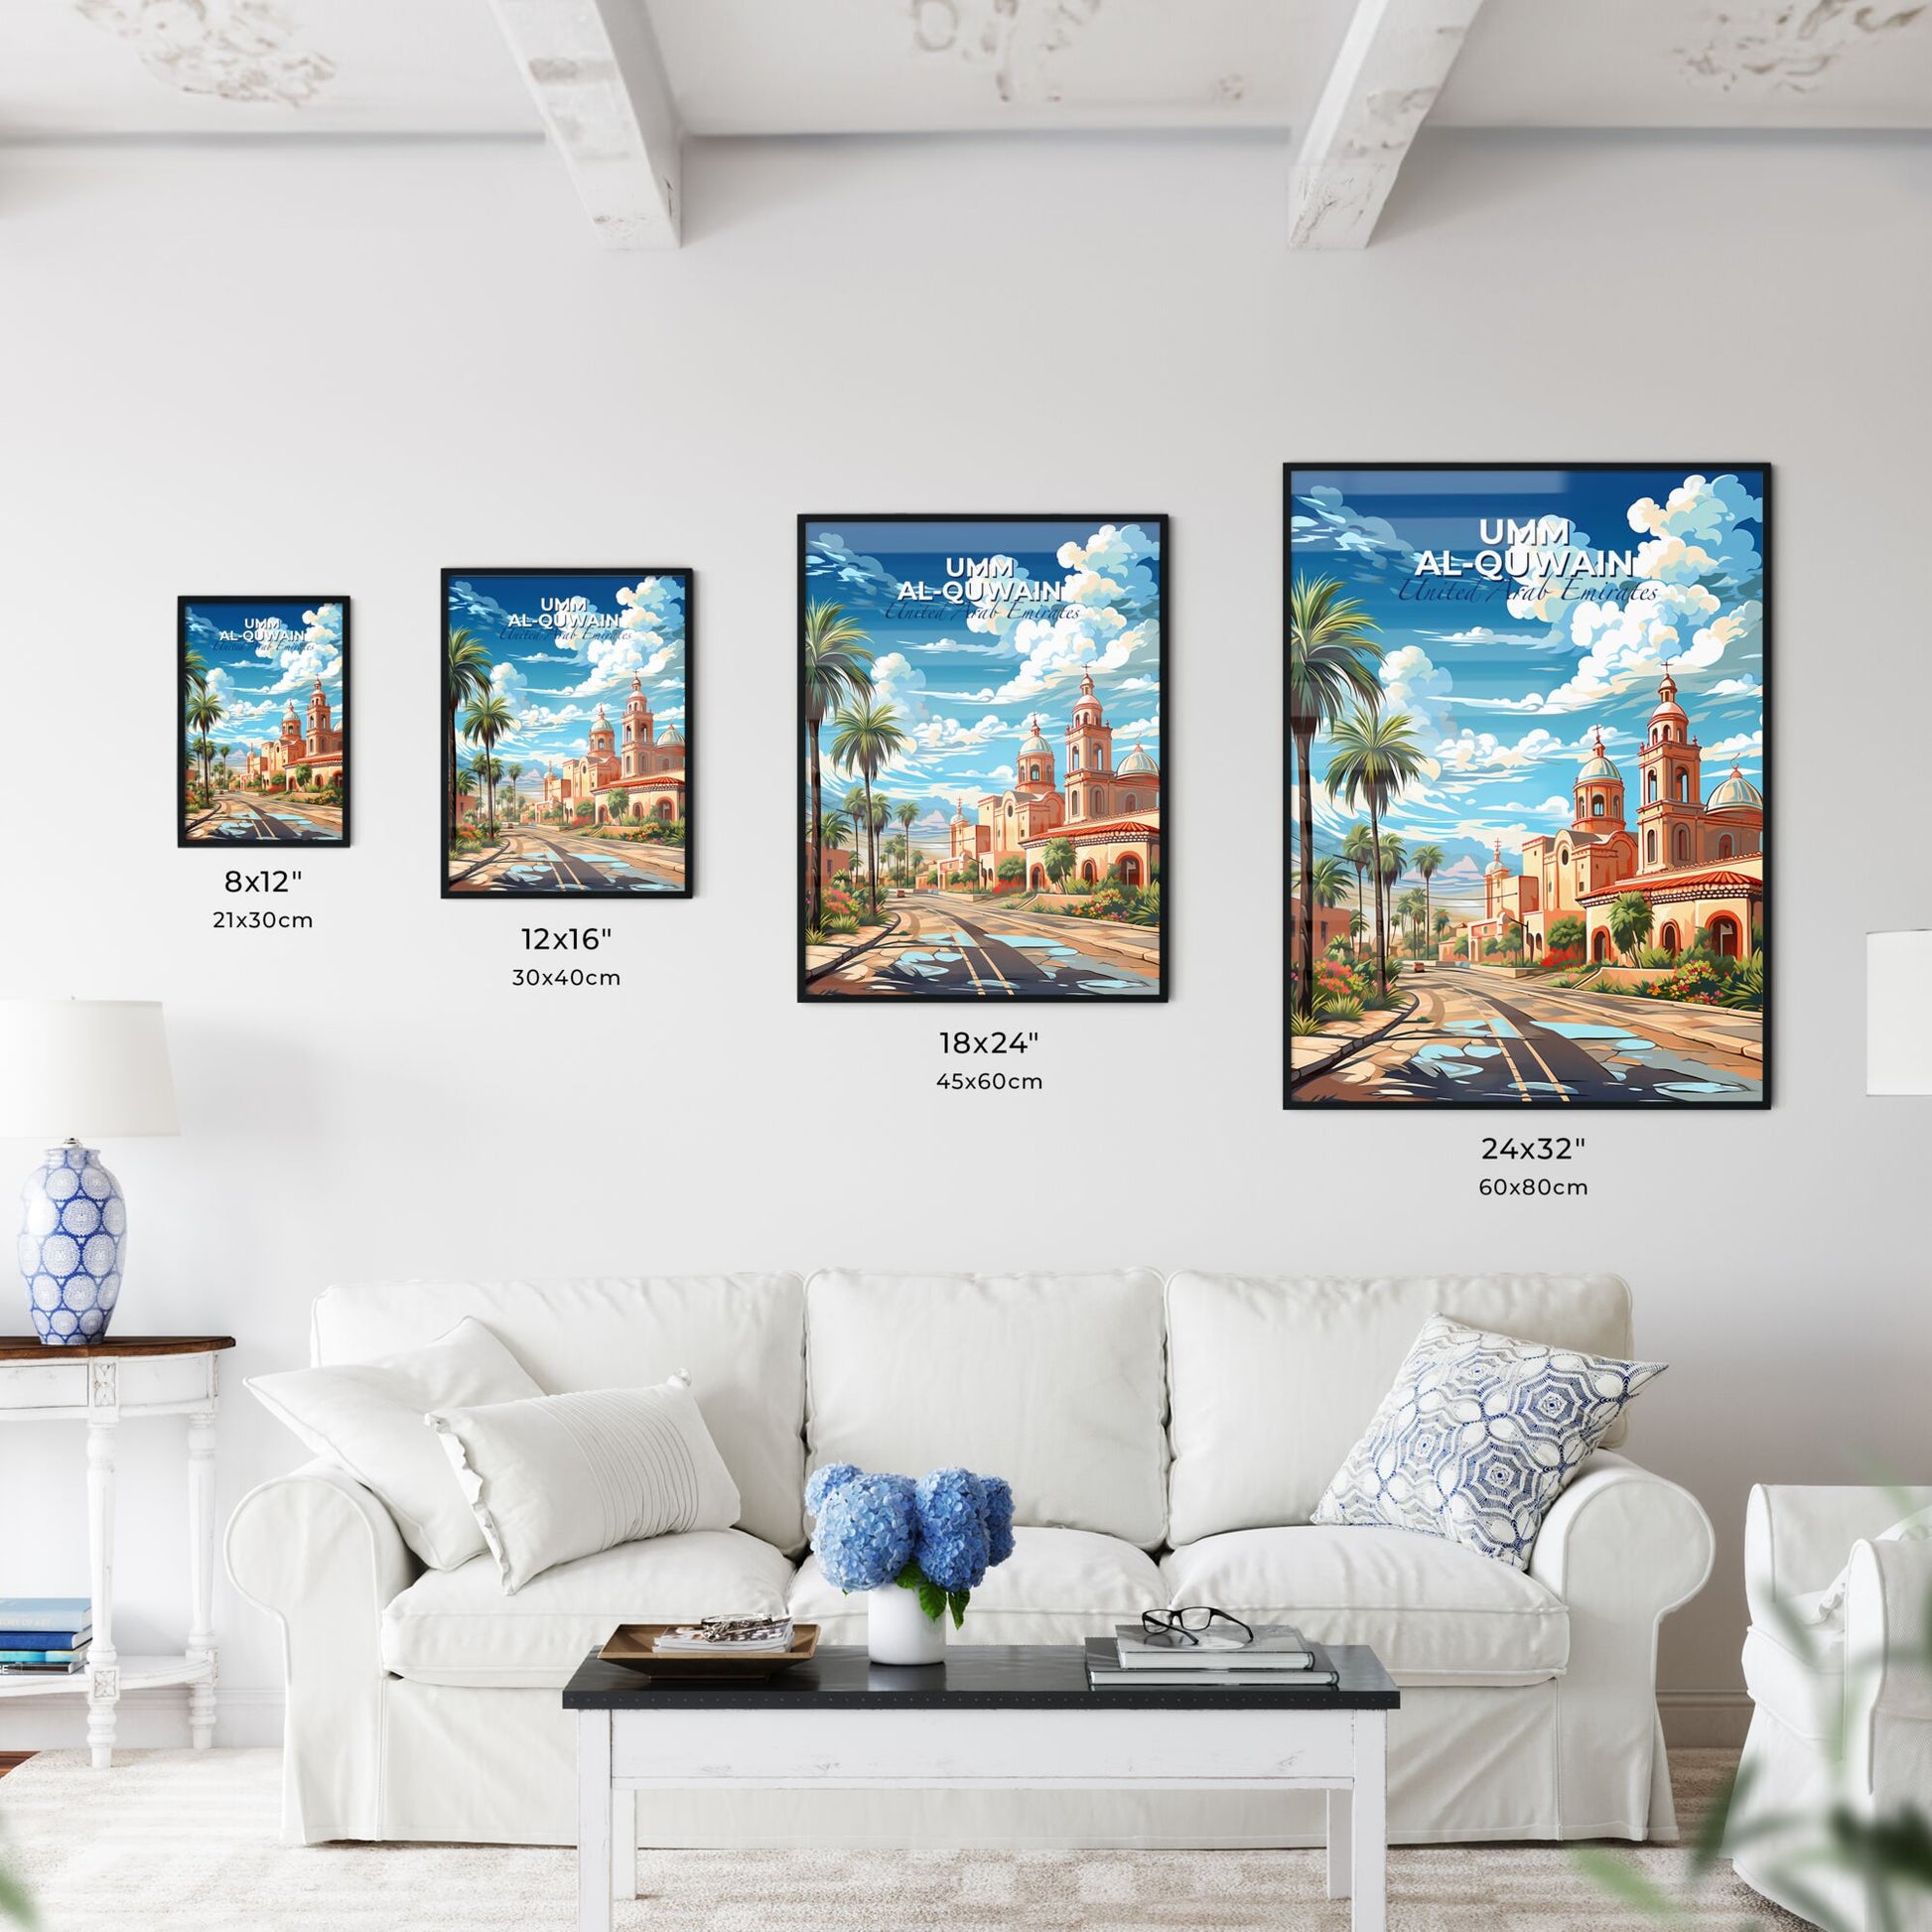 Vibrant Painting Depicting Umm al-Quwain Skyline with Buildings, Palm Trees, and Road Default Title